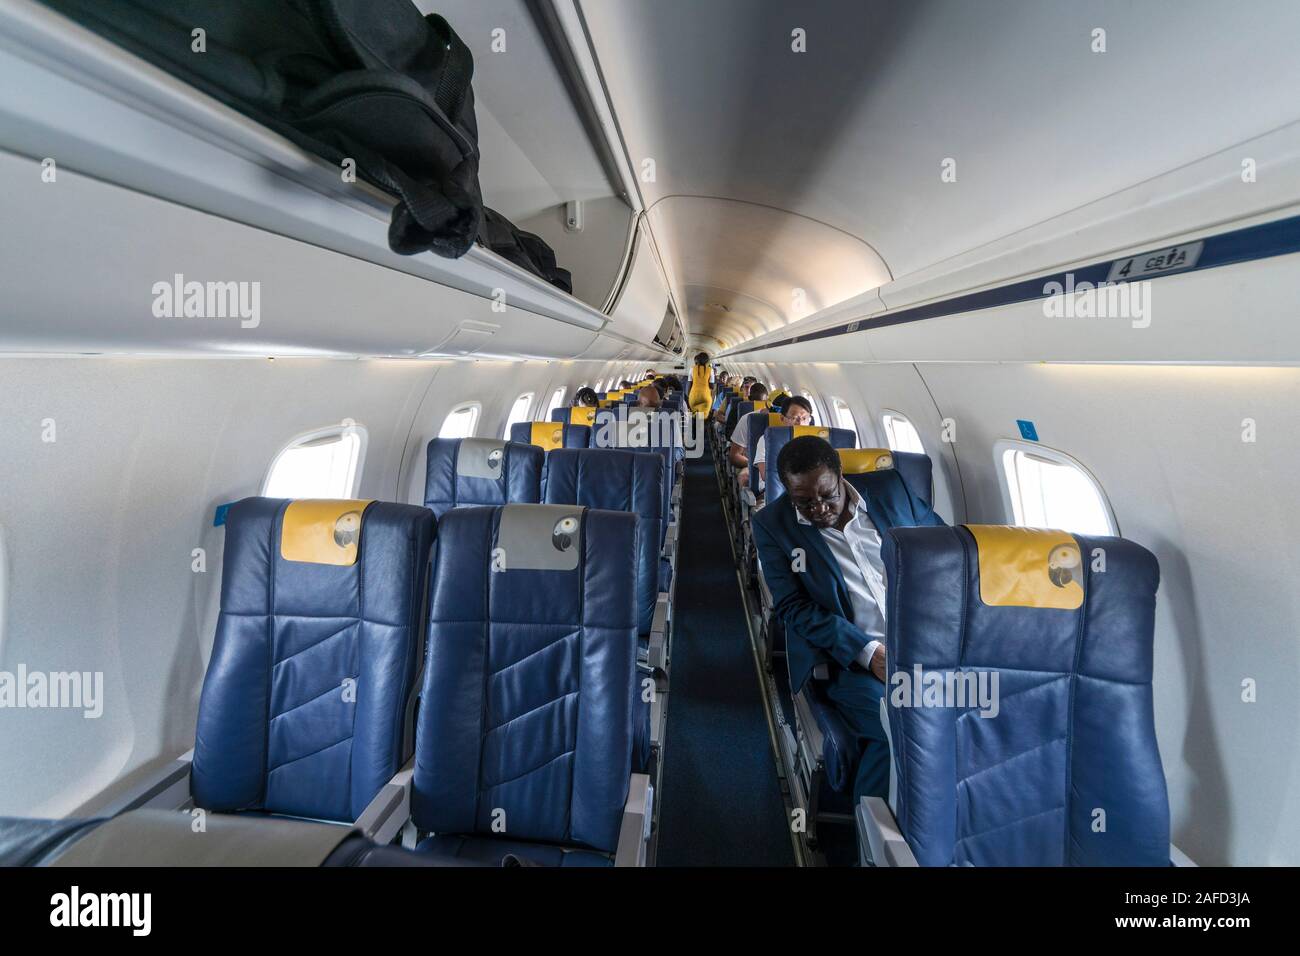 Zimbabwe. The interior of a Fastjet Embraer-145 plane during a flight from Victoria falls to Harare. Stock Photo